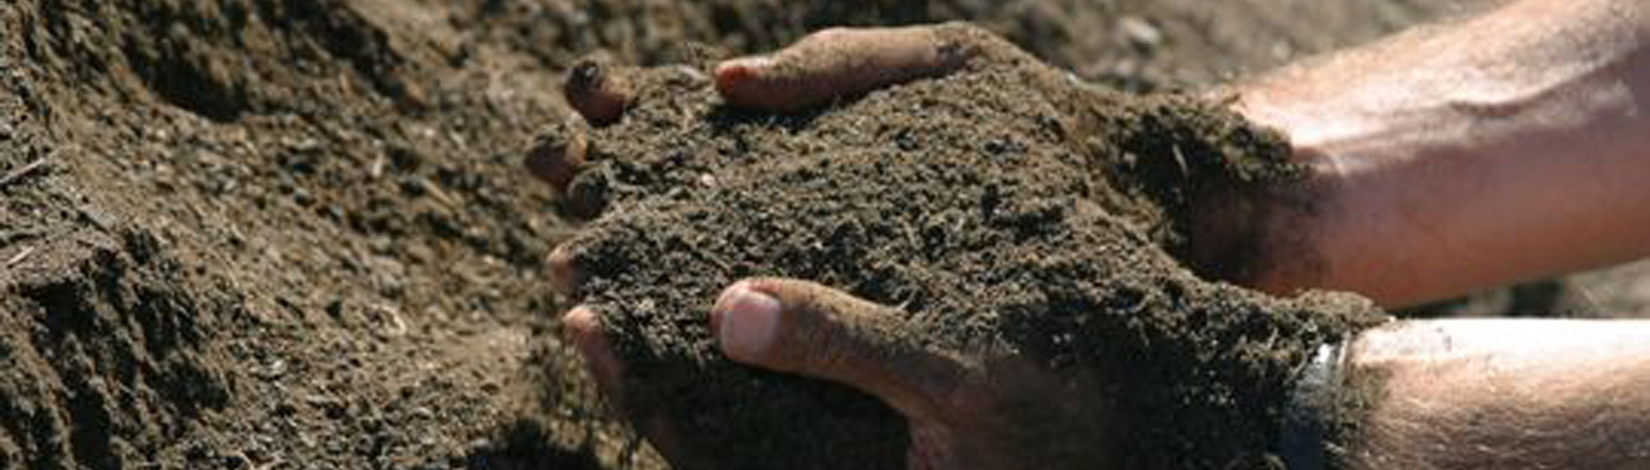 Hands sift through compost ready for use